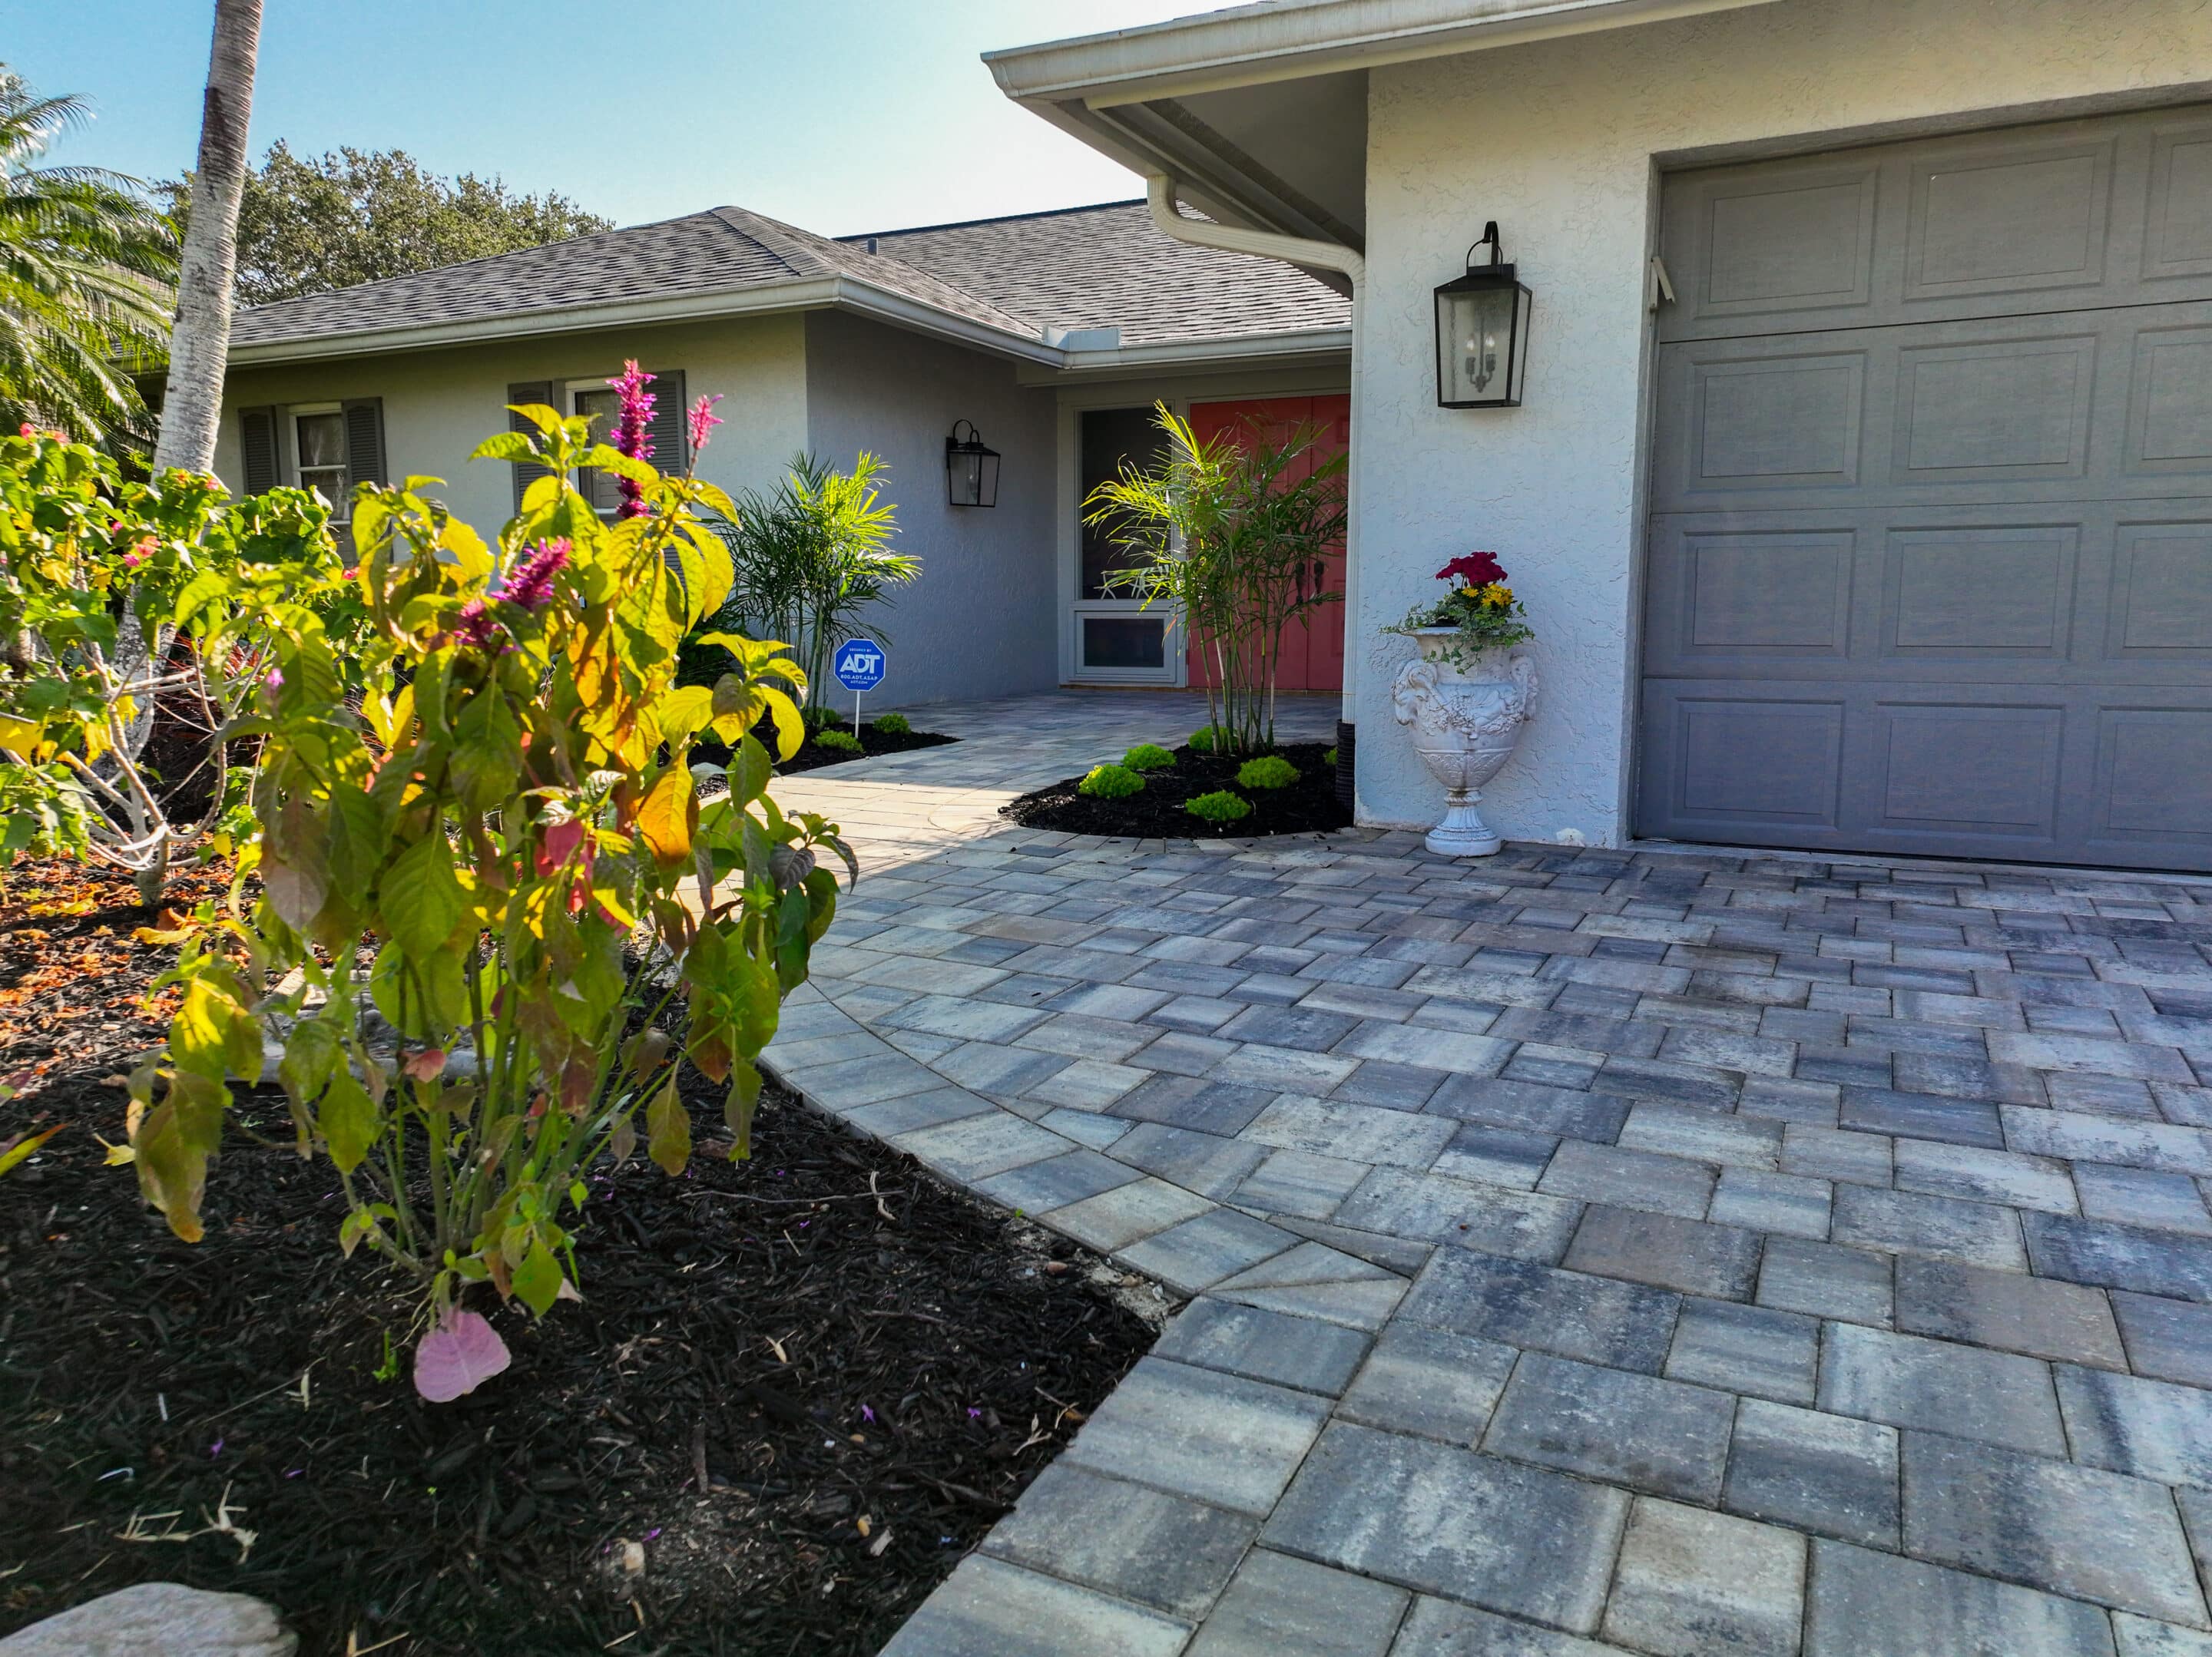 Beautiful Thick Interlocking Concrete Paver Driveway and Walkway Transformation in Naples